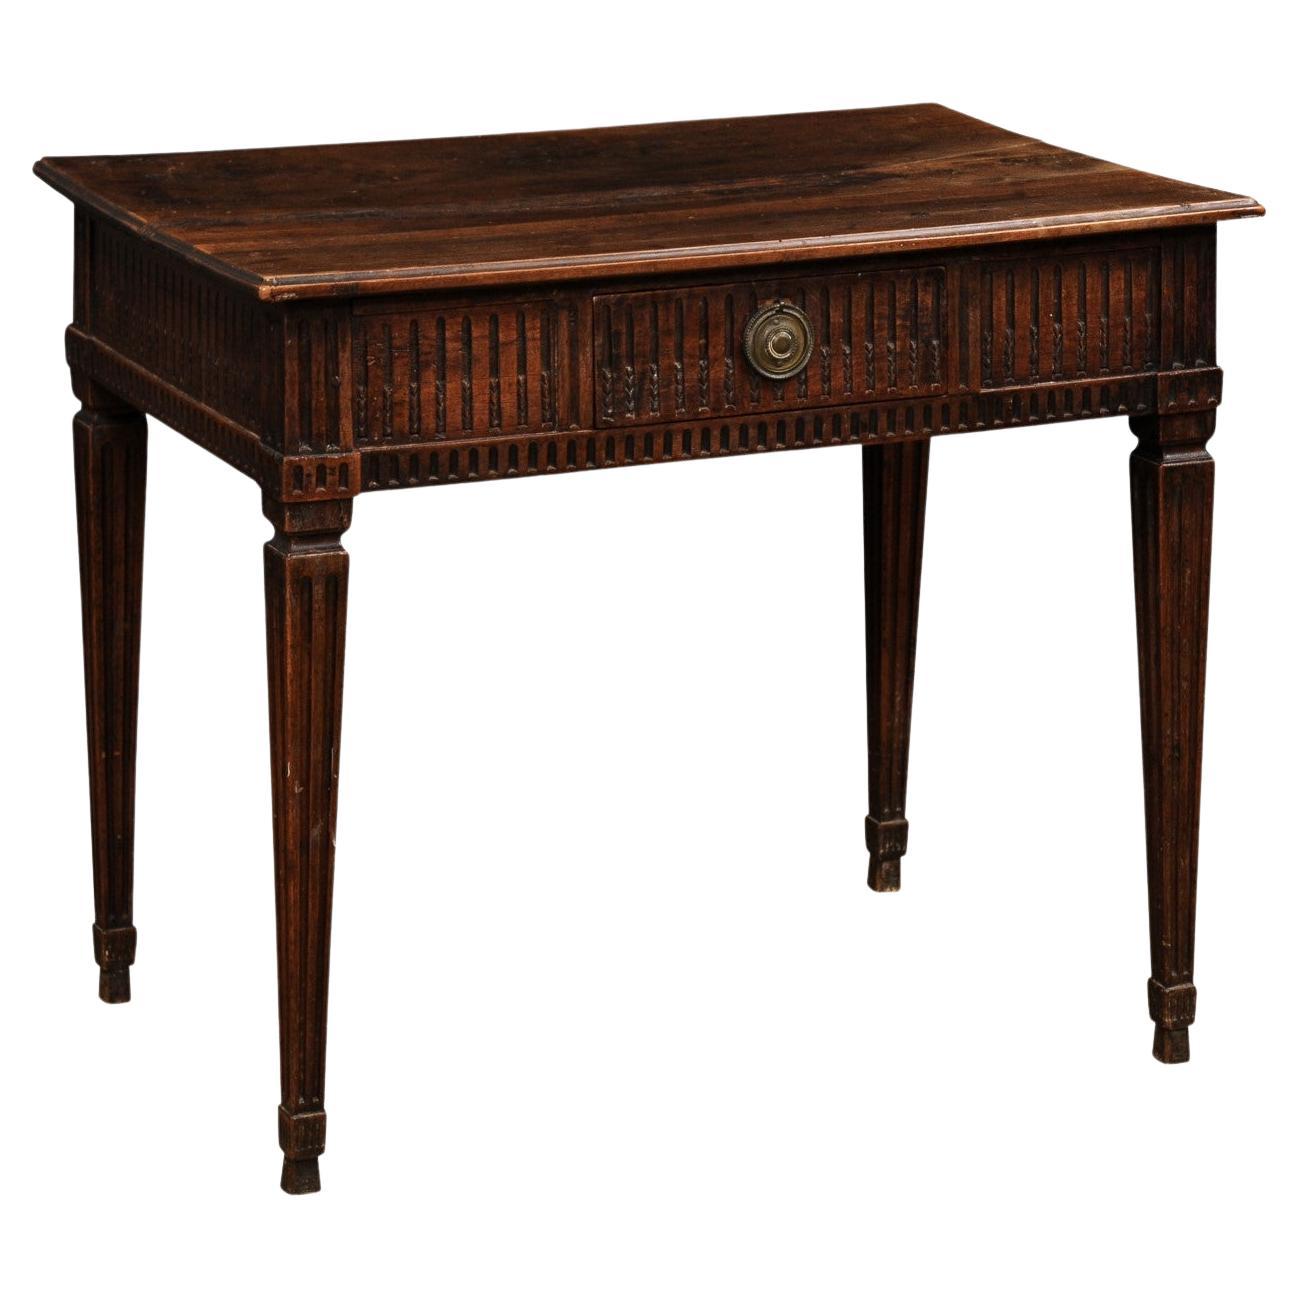 French Louis XVI Period 18th Century Walnut Desk with Carved Fluted Apron For Sale